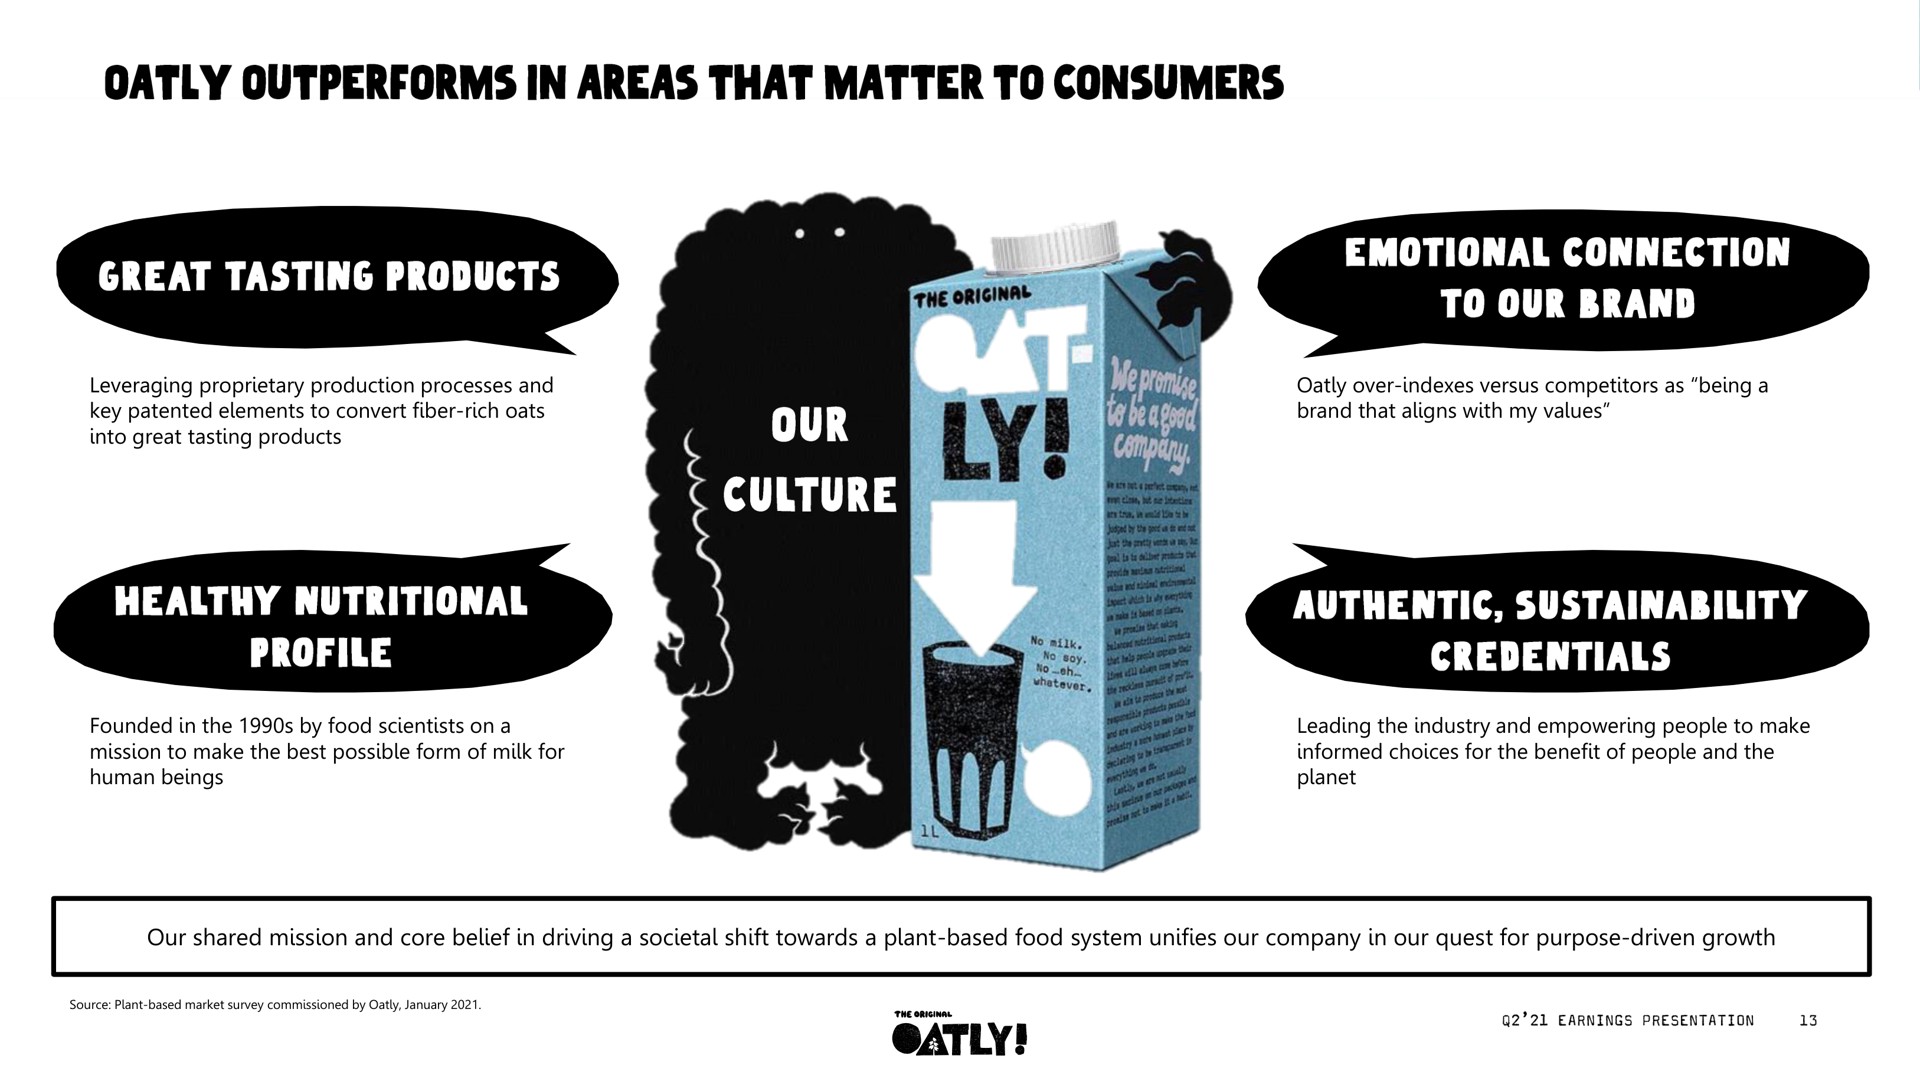 our shared mission and core belief in driving a societal shift towards a plant based food system unifies our company in our quest for purpose driven growth outperforms areas that matter to consumers aes at | Oatly